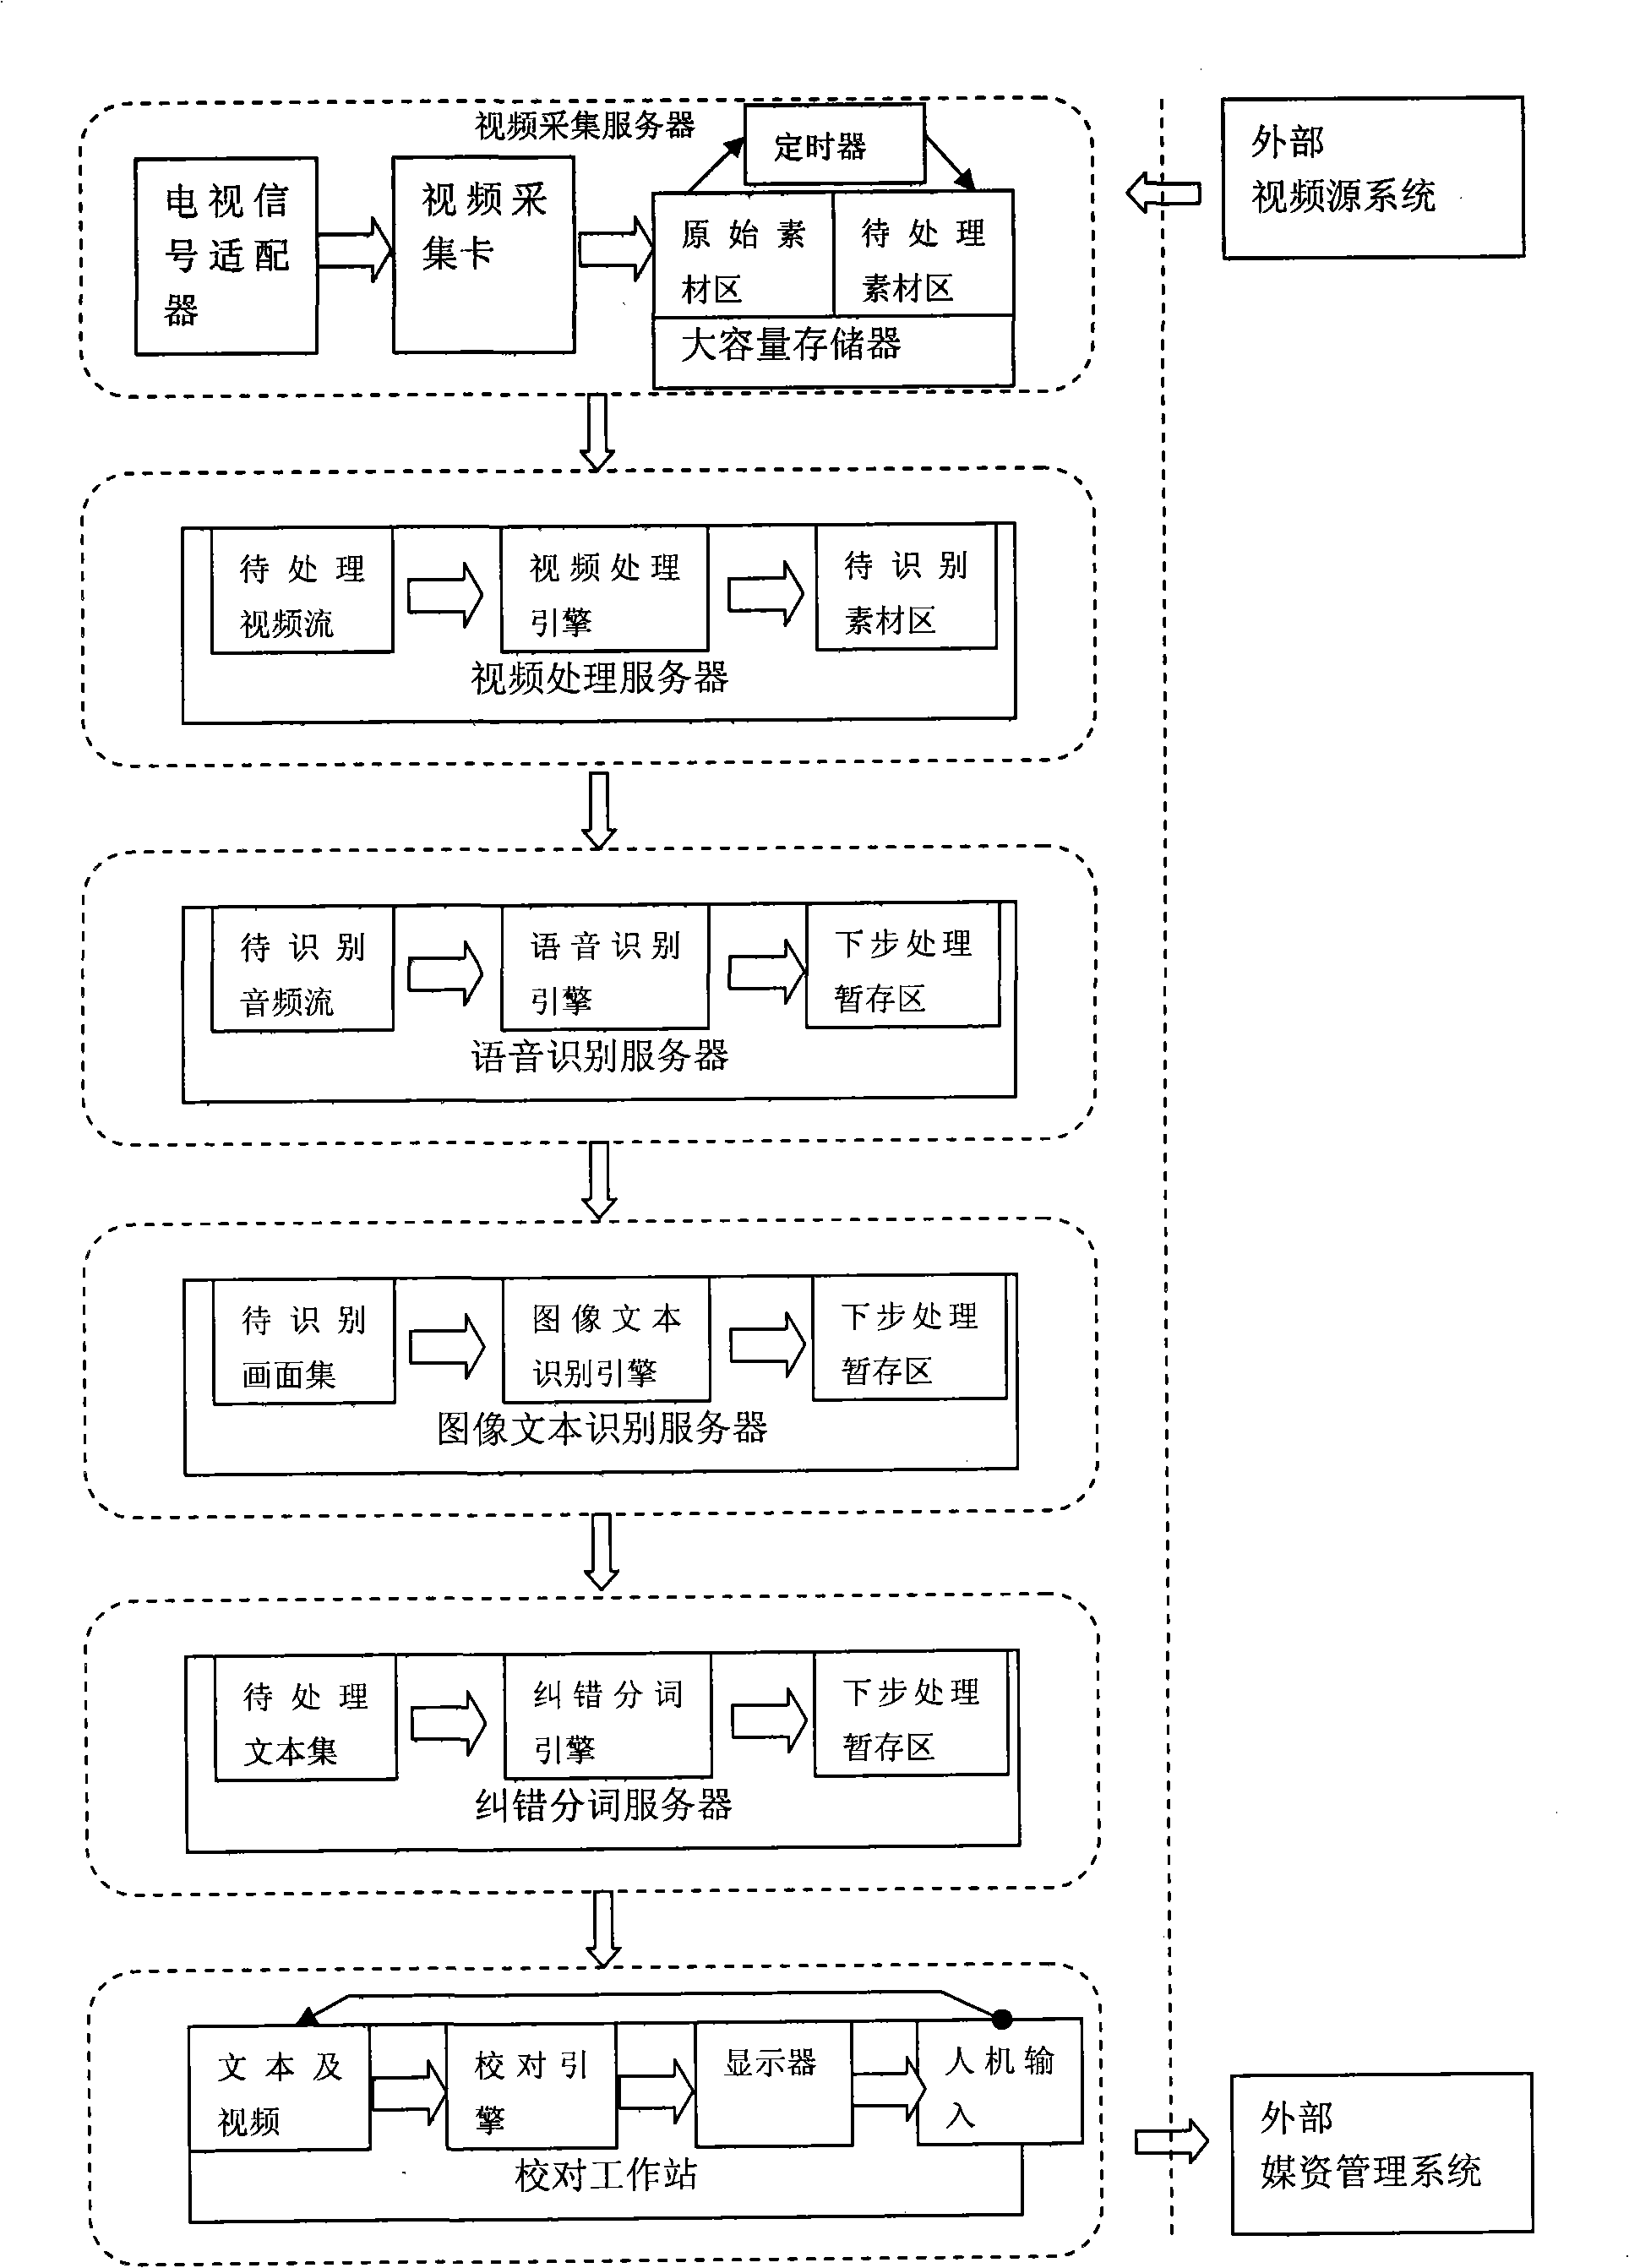 Method for indexing TV news by utilizing computer system